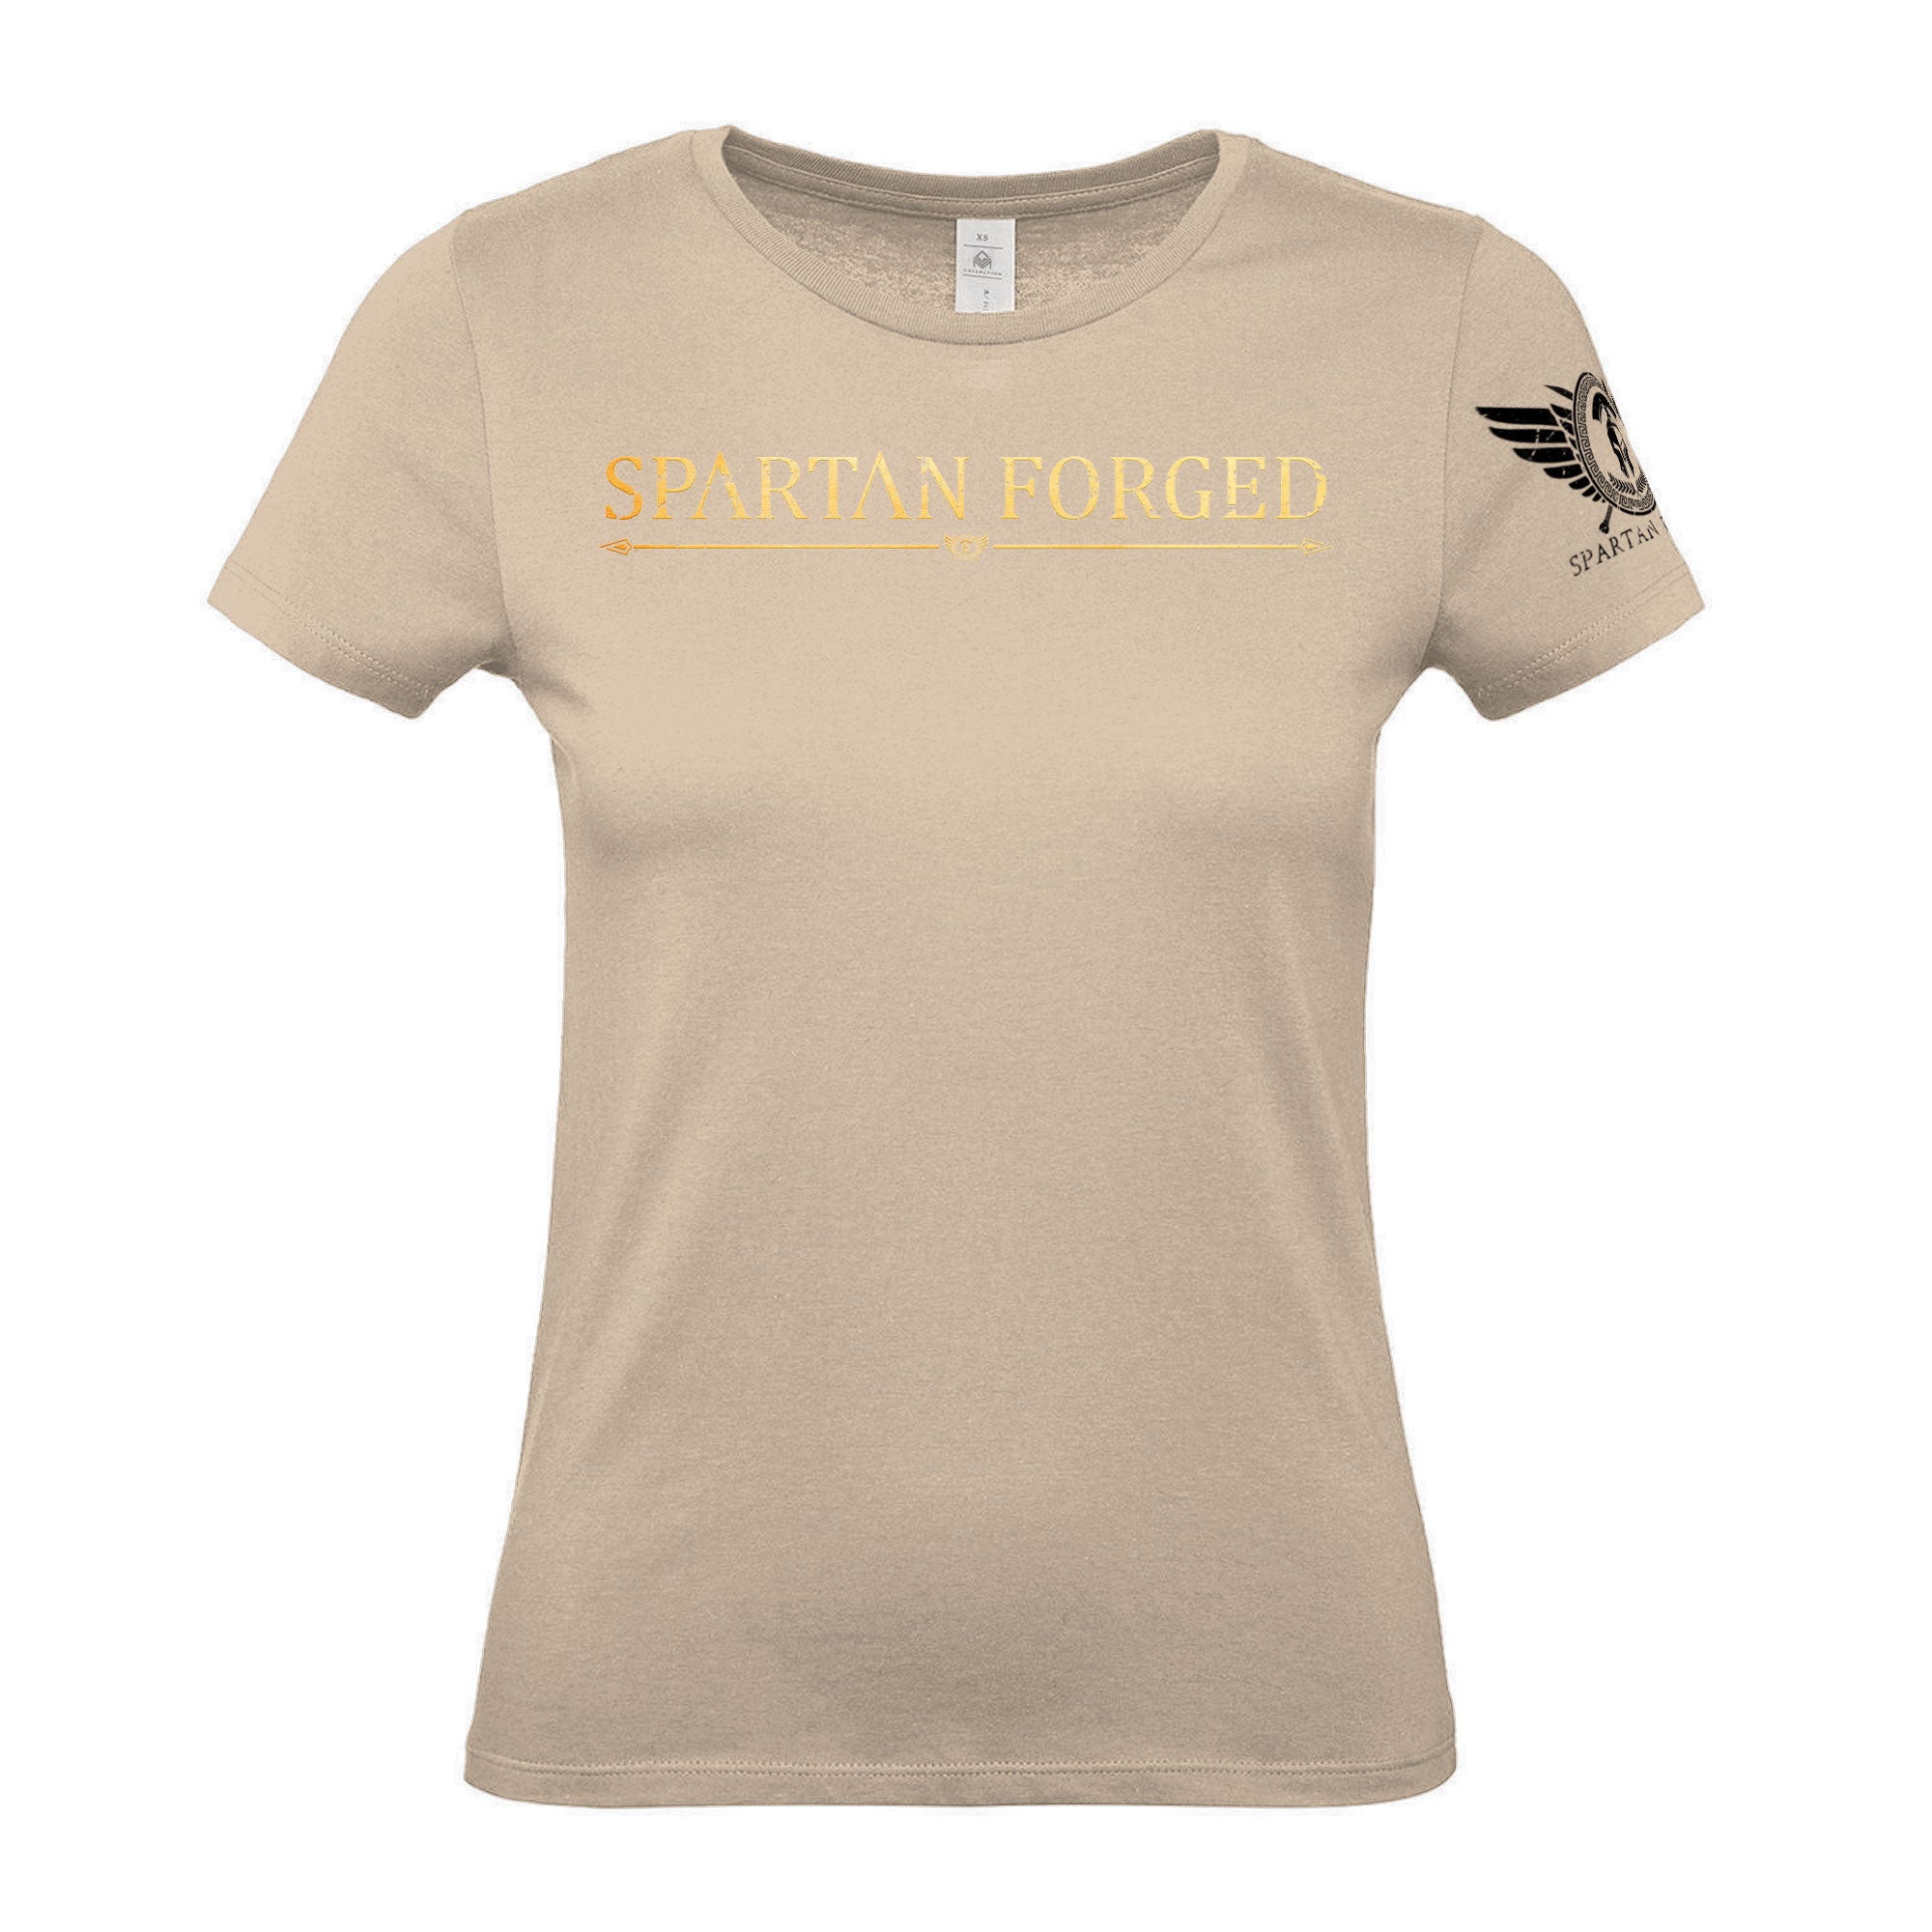 Spartan Forged Gold - Women's Gym T-Shirt